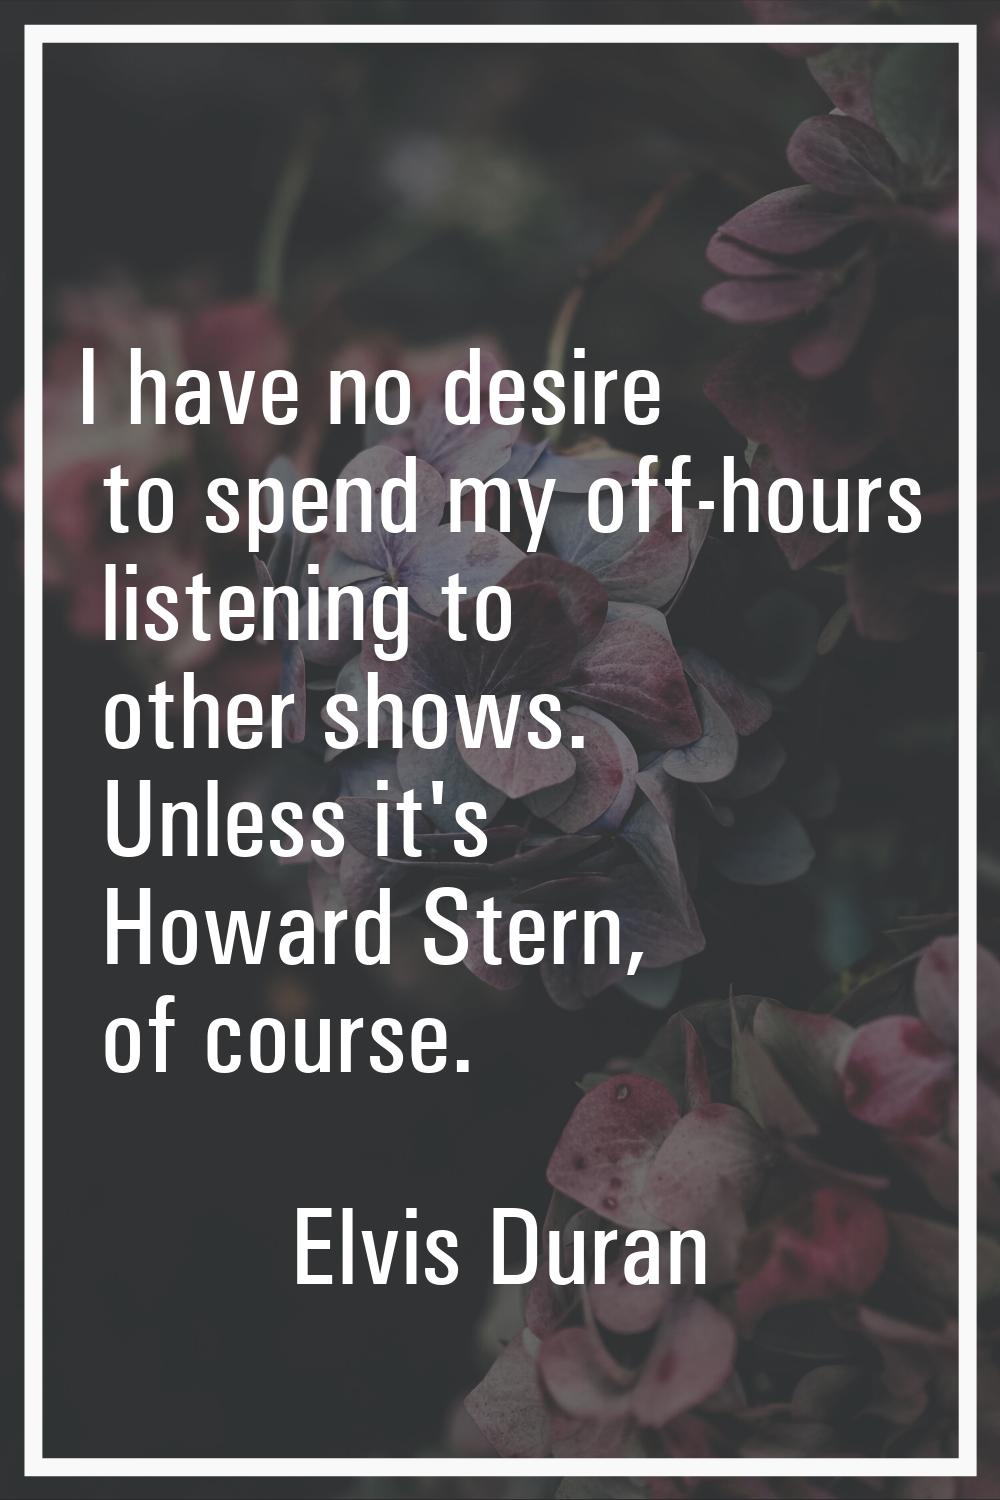 I have no desire to spend my off-hours listening to other shows. Unless it's Howard Stern, of cours